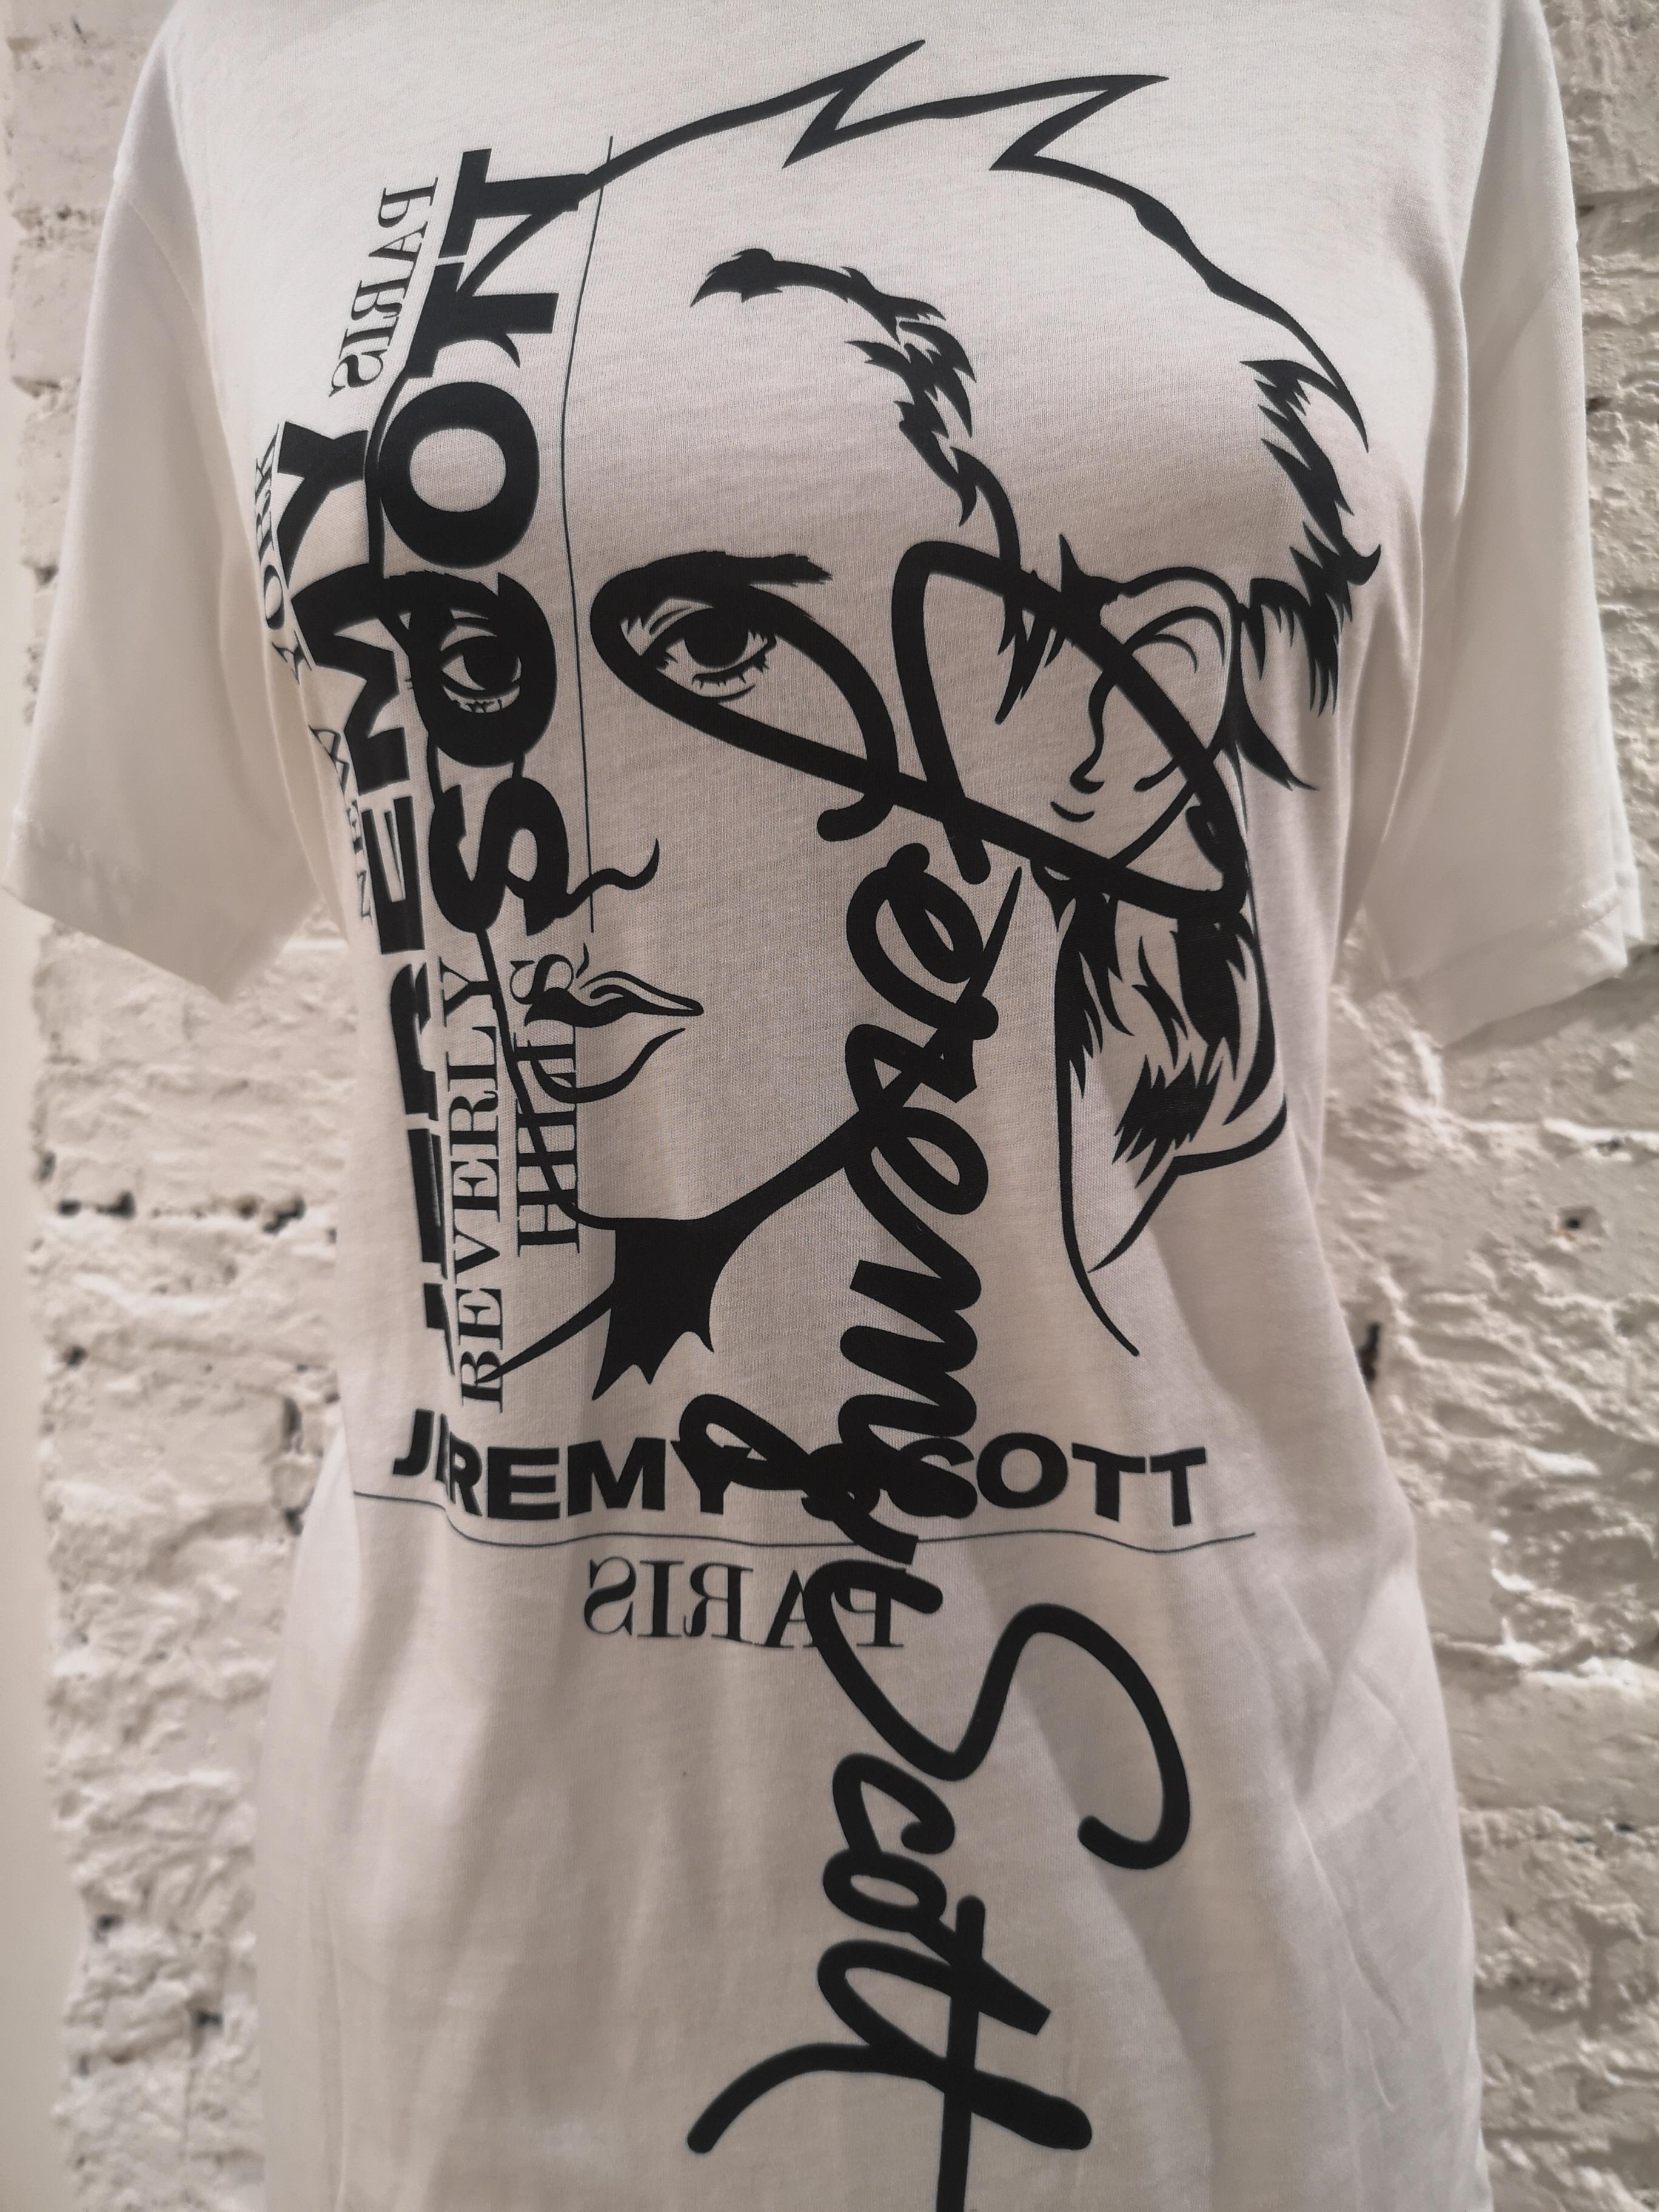 Jeremy Scott white cotton T-shirt NWOT
totally made in italy in 100% cotton
size m
total lenght 70 cm